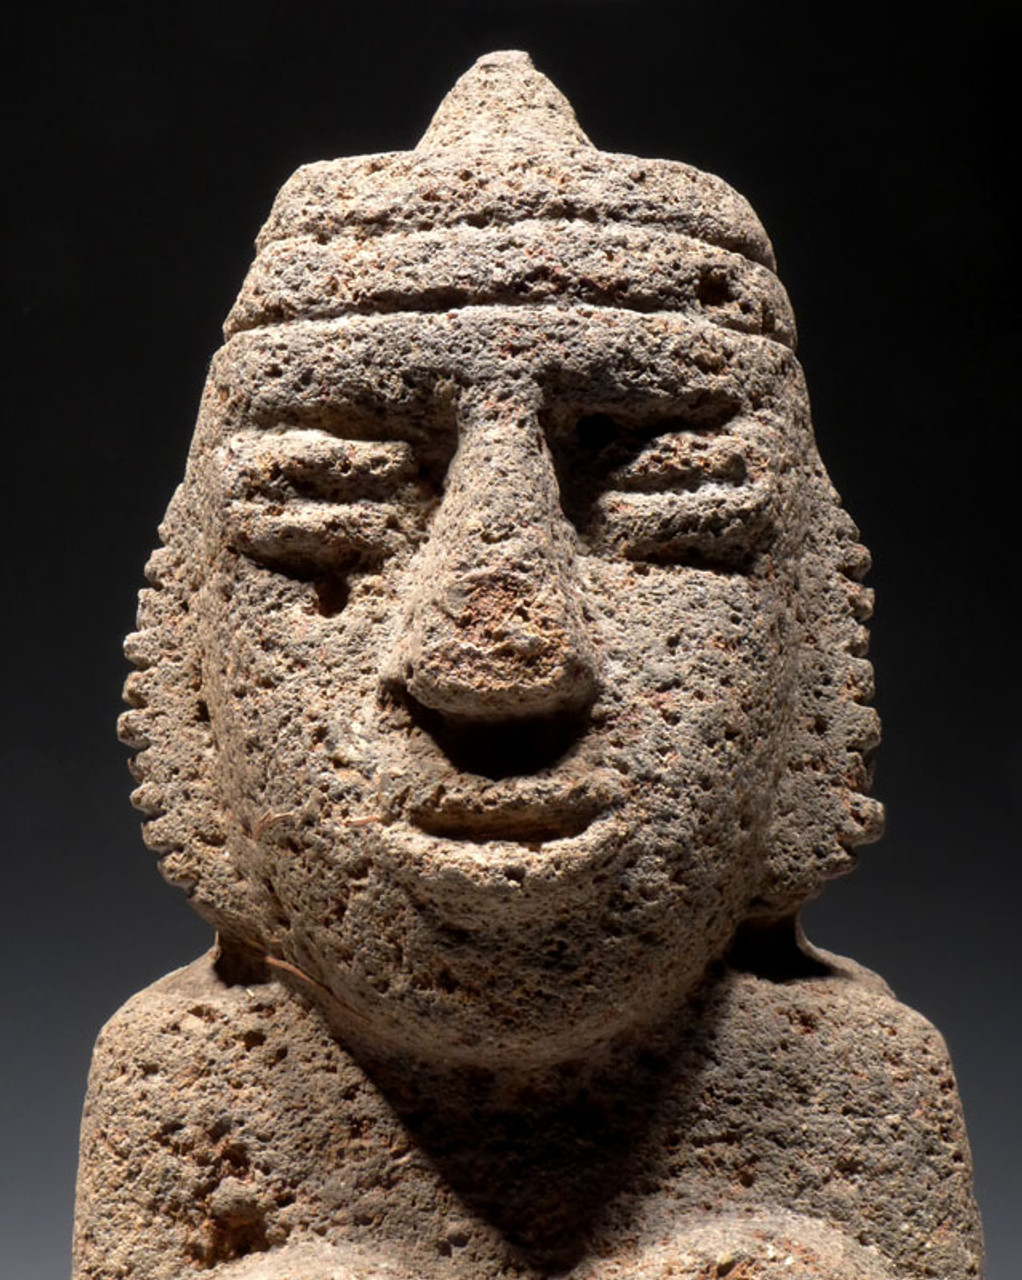 PC098 - MUSEUM-CLASS COLOSSAL PORTABLE ART PRE-COLUMBIAN STONE SHAMAN FIGURE IN TRANCE FROM CENTRAL AMERICA